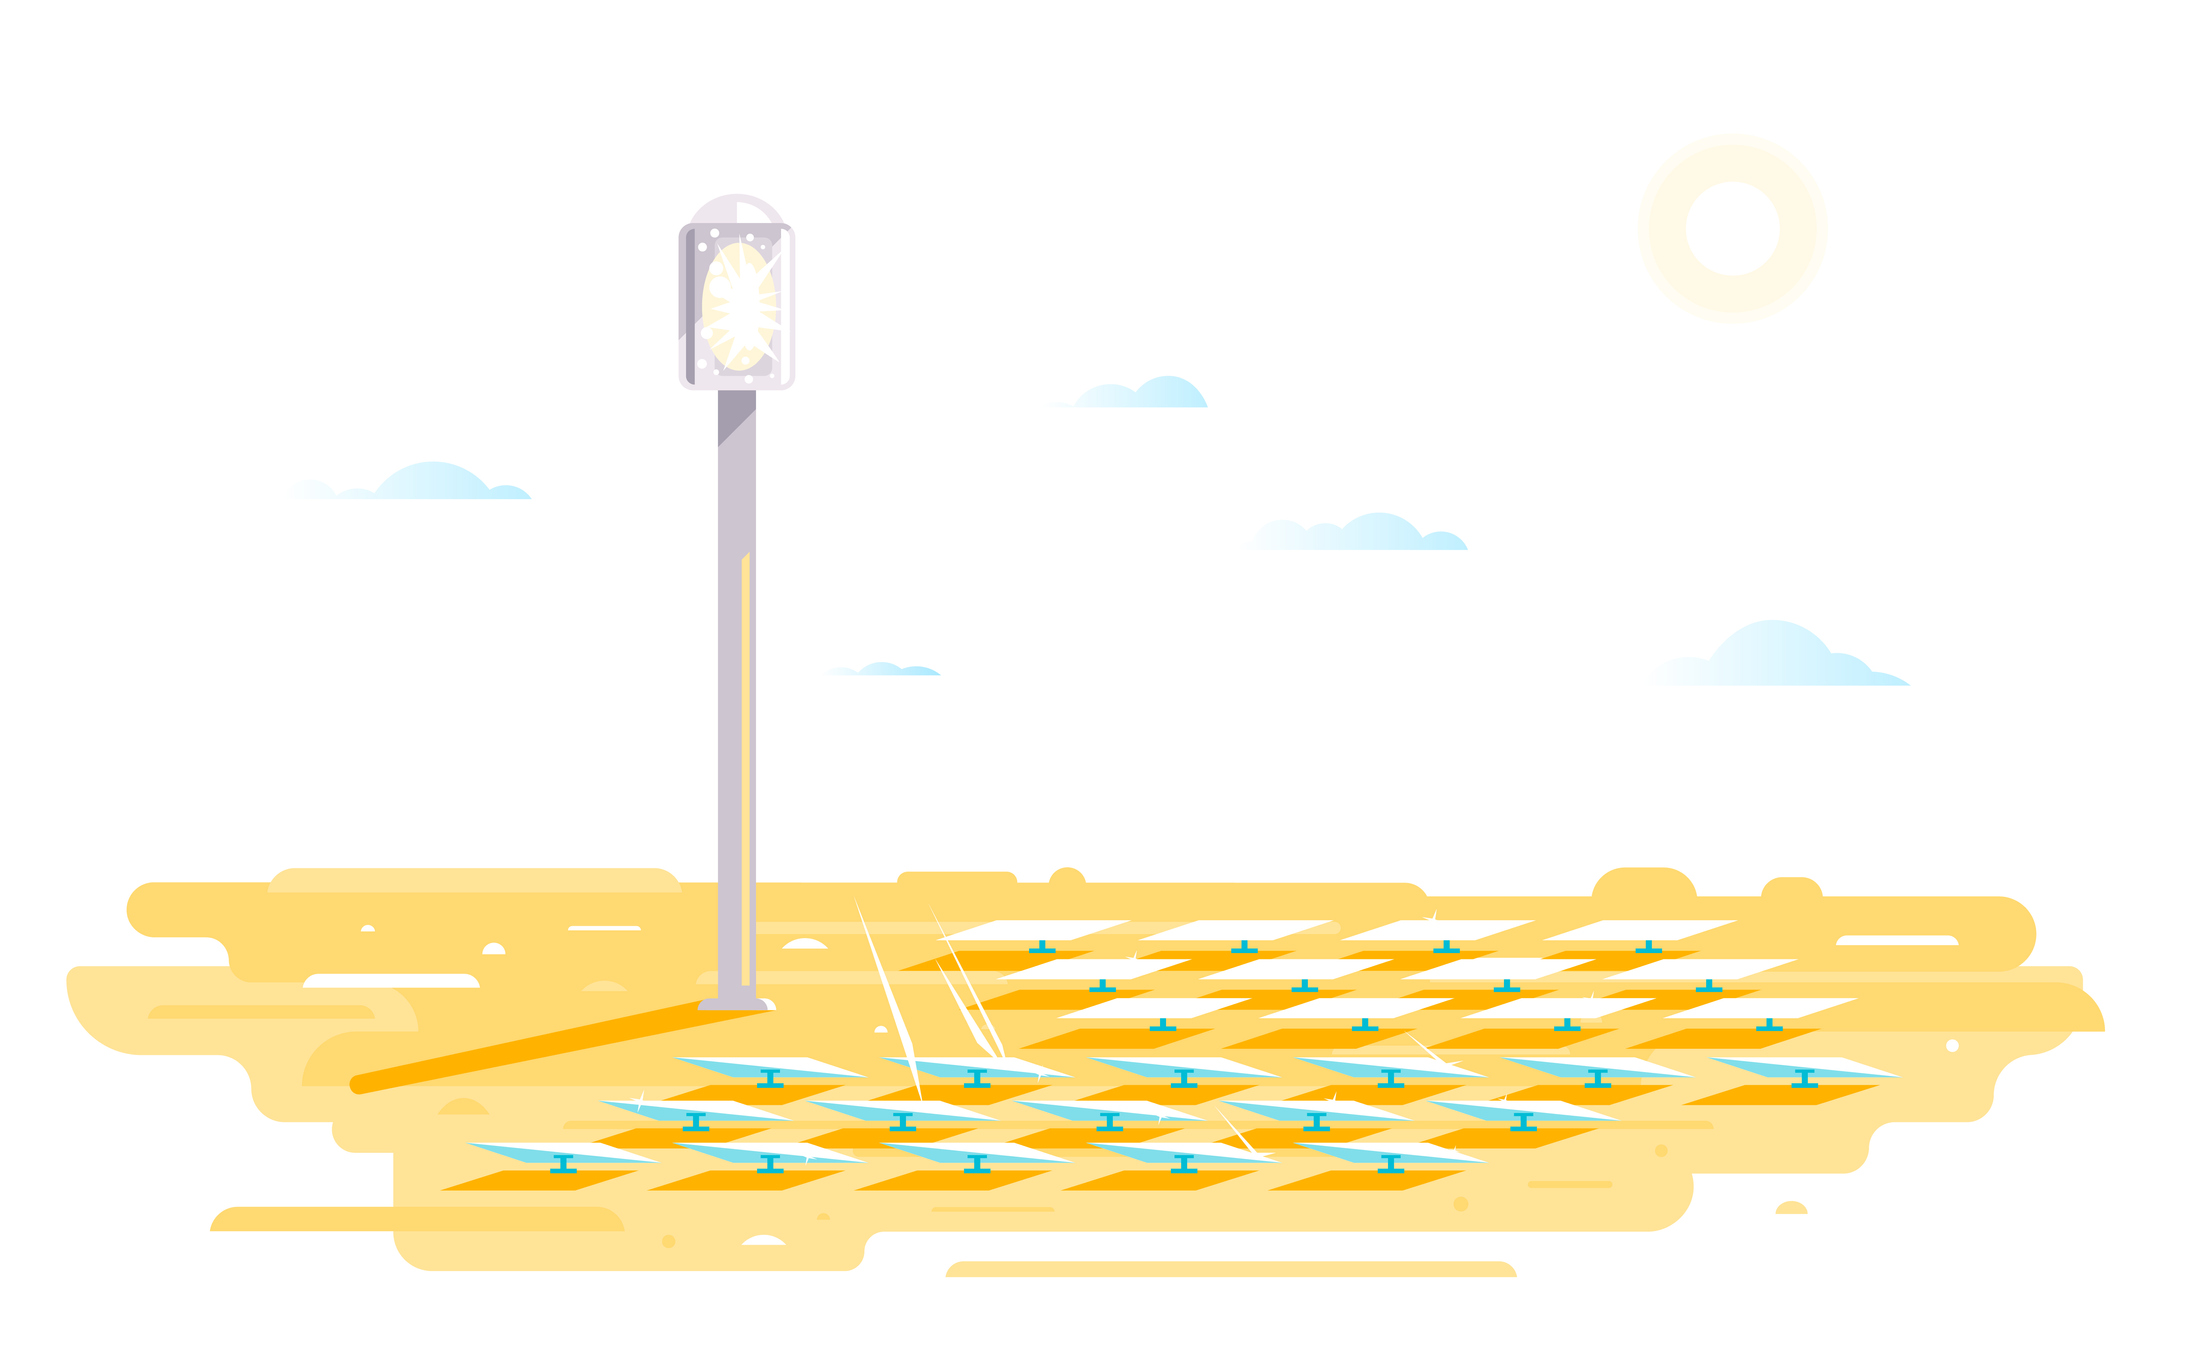 An illustration of a heliostat with lots of flat sun-tracking mirrors in a desert.